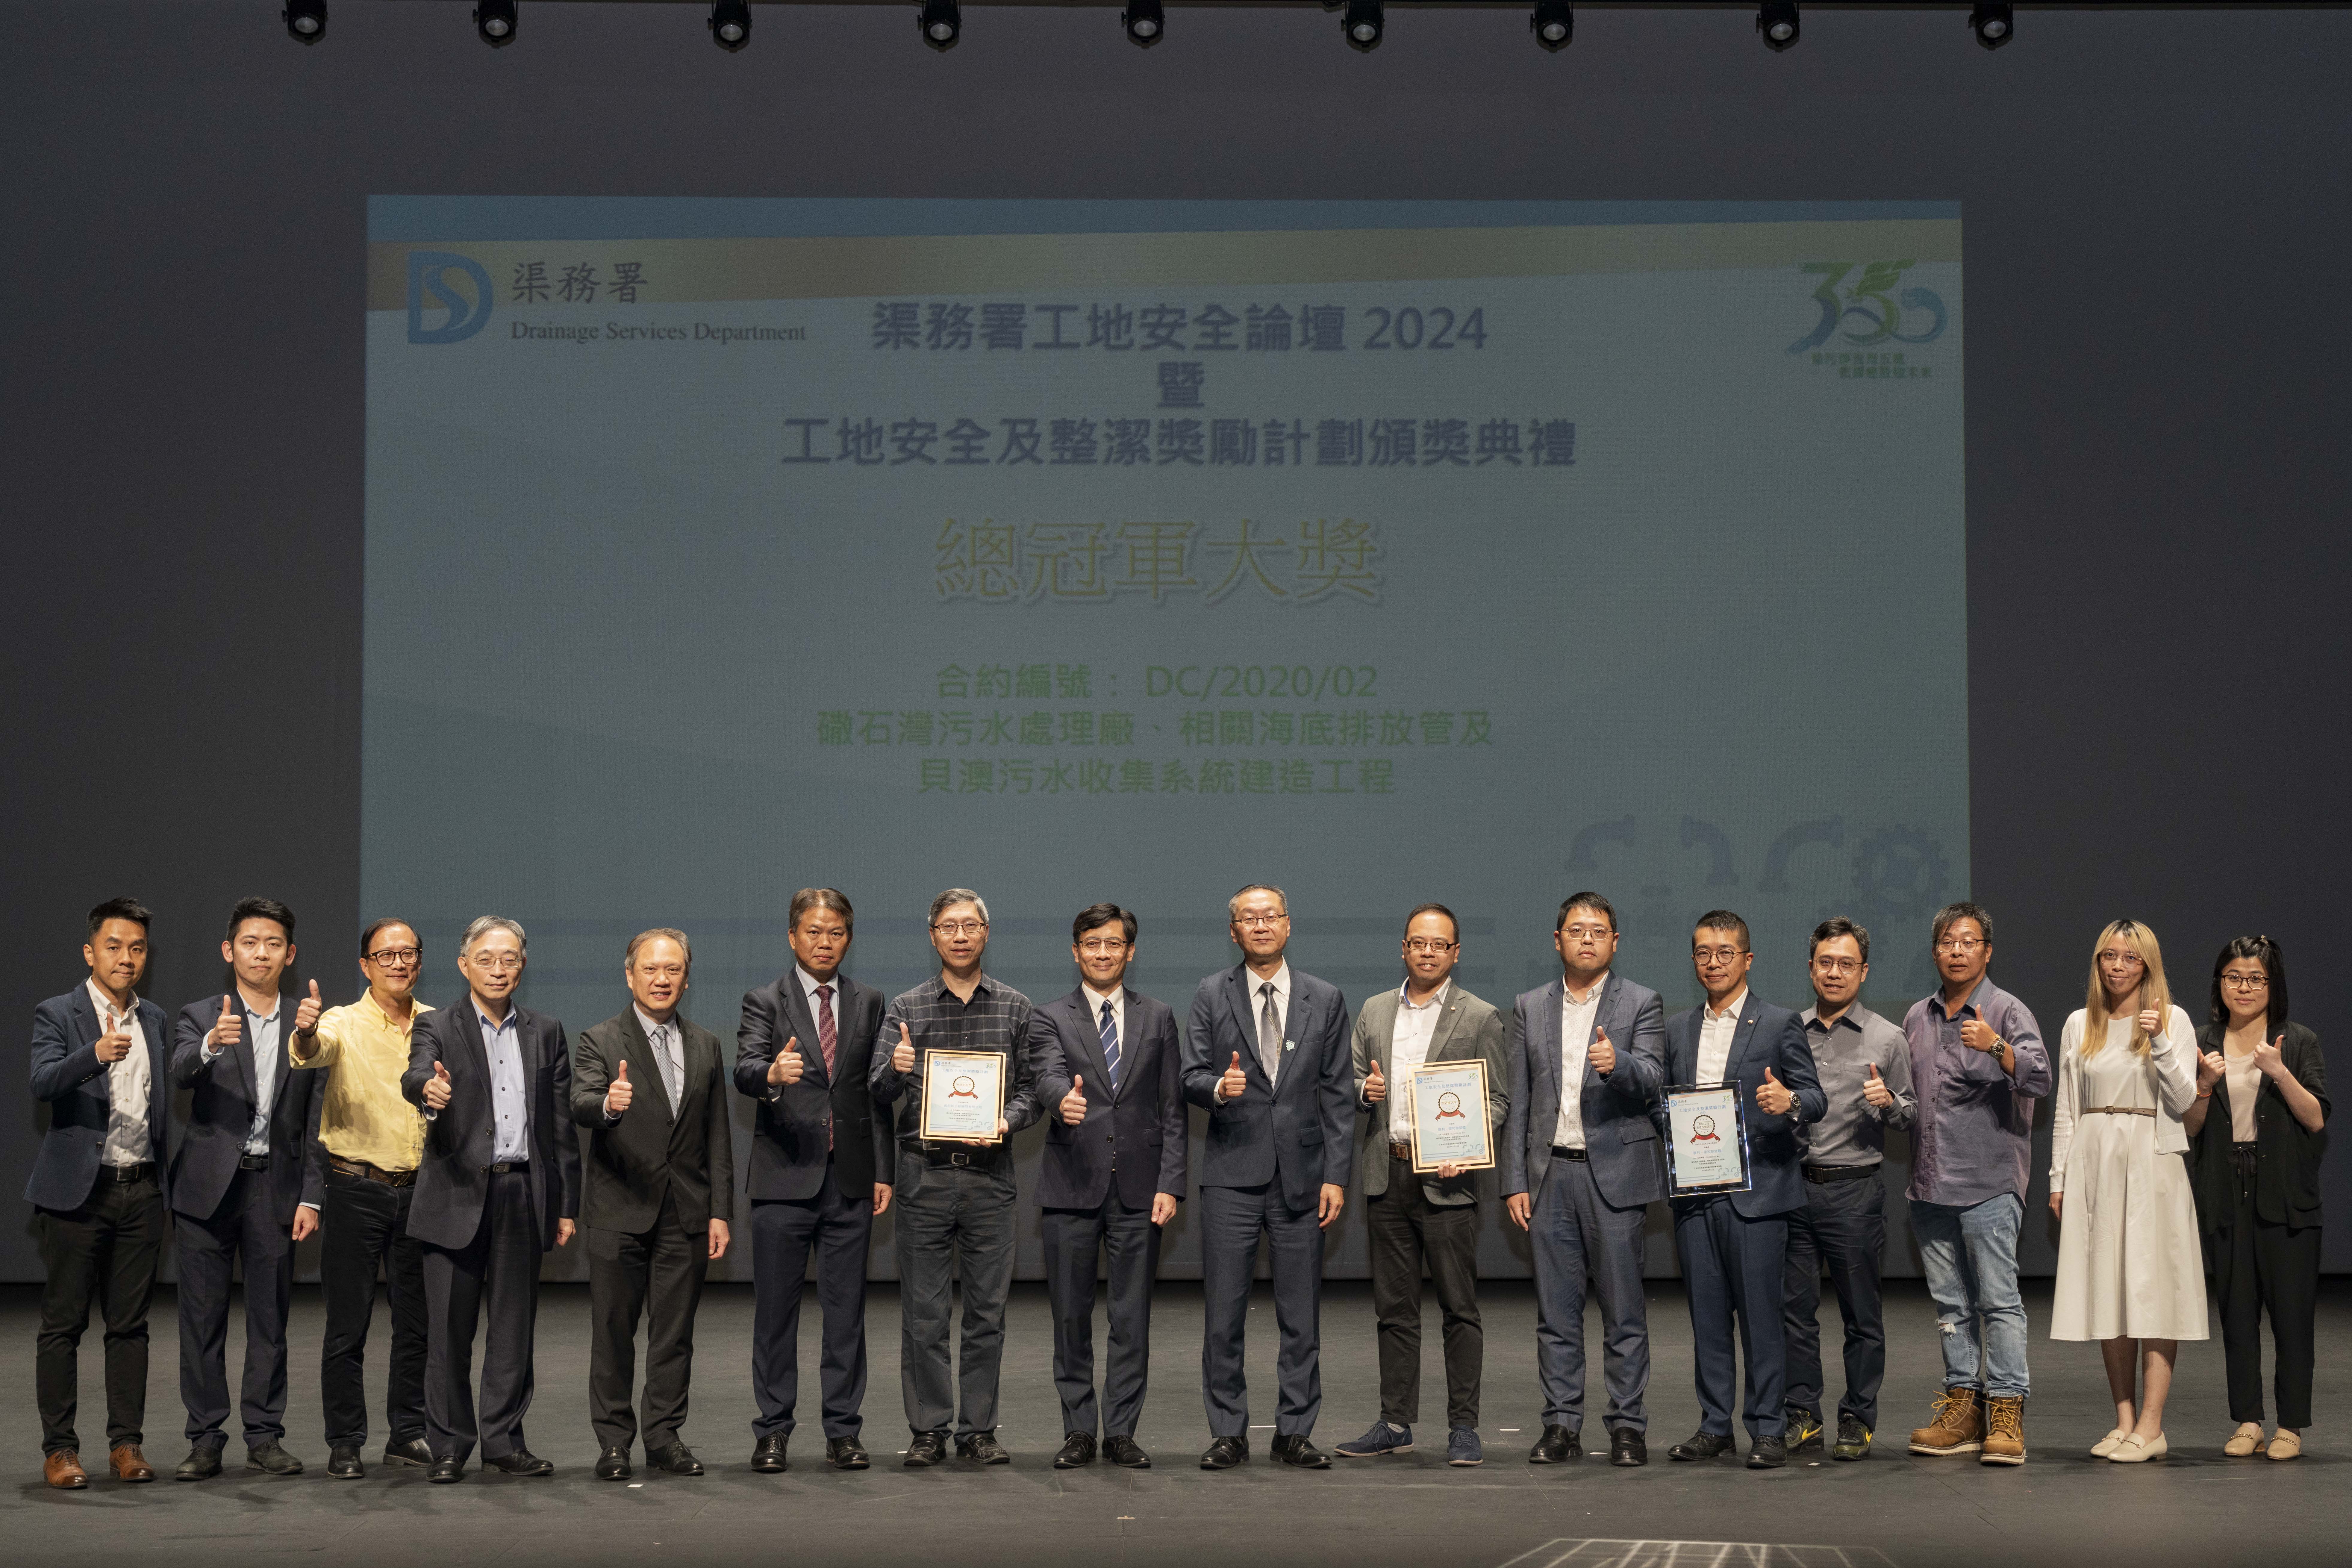 Group photo of Director of Drainage Services, Mr MOK Wing-cheong (eighth left), Deputy Director of Drainage Services, Mr LEE Hong-nin (nineth left), Assistant Director/Sewage Services, Mr LEE Wai-man (sixth left) and the Grand Award winning team